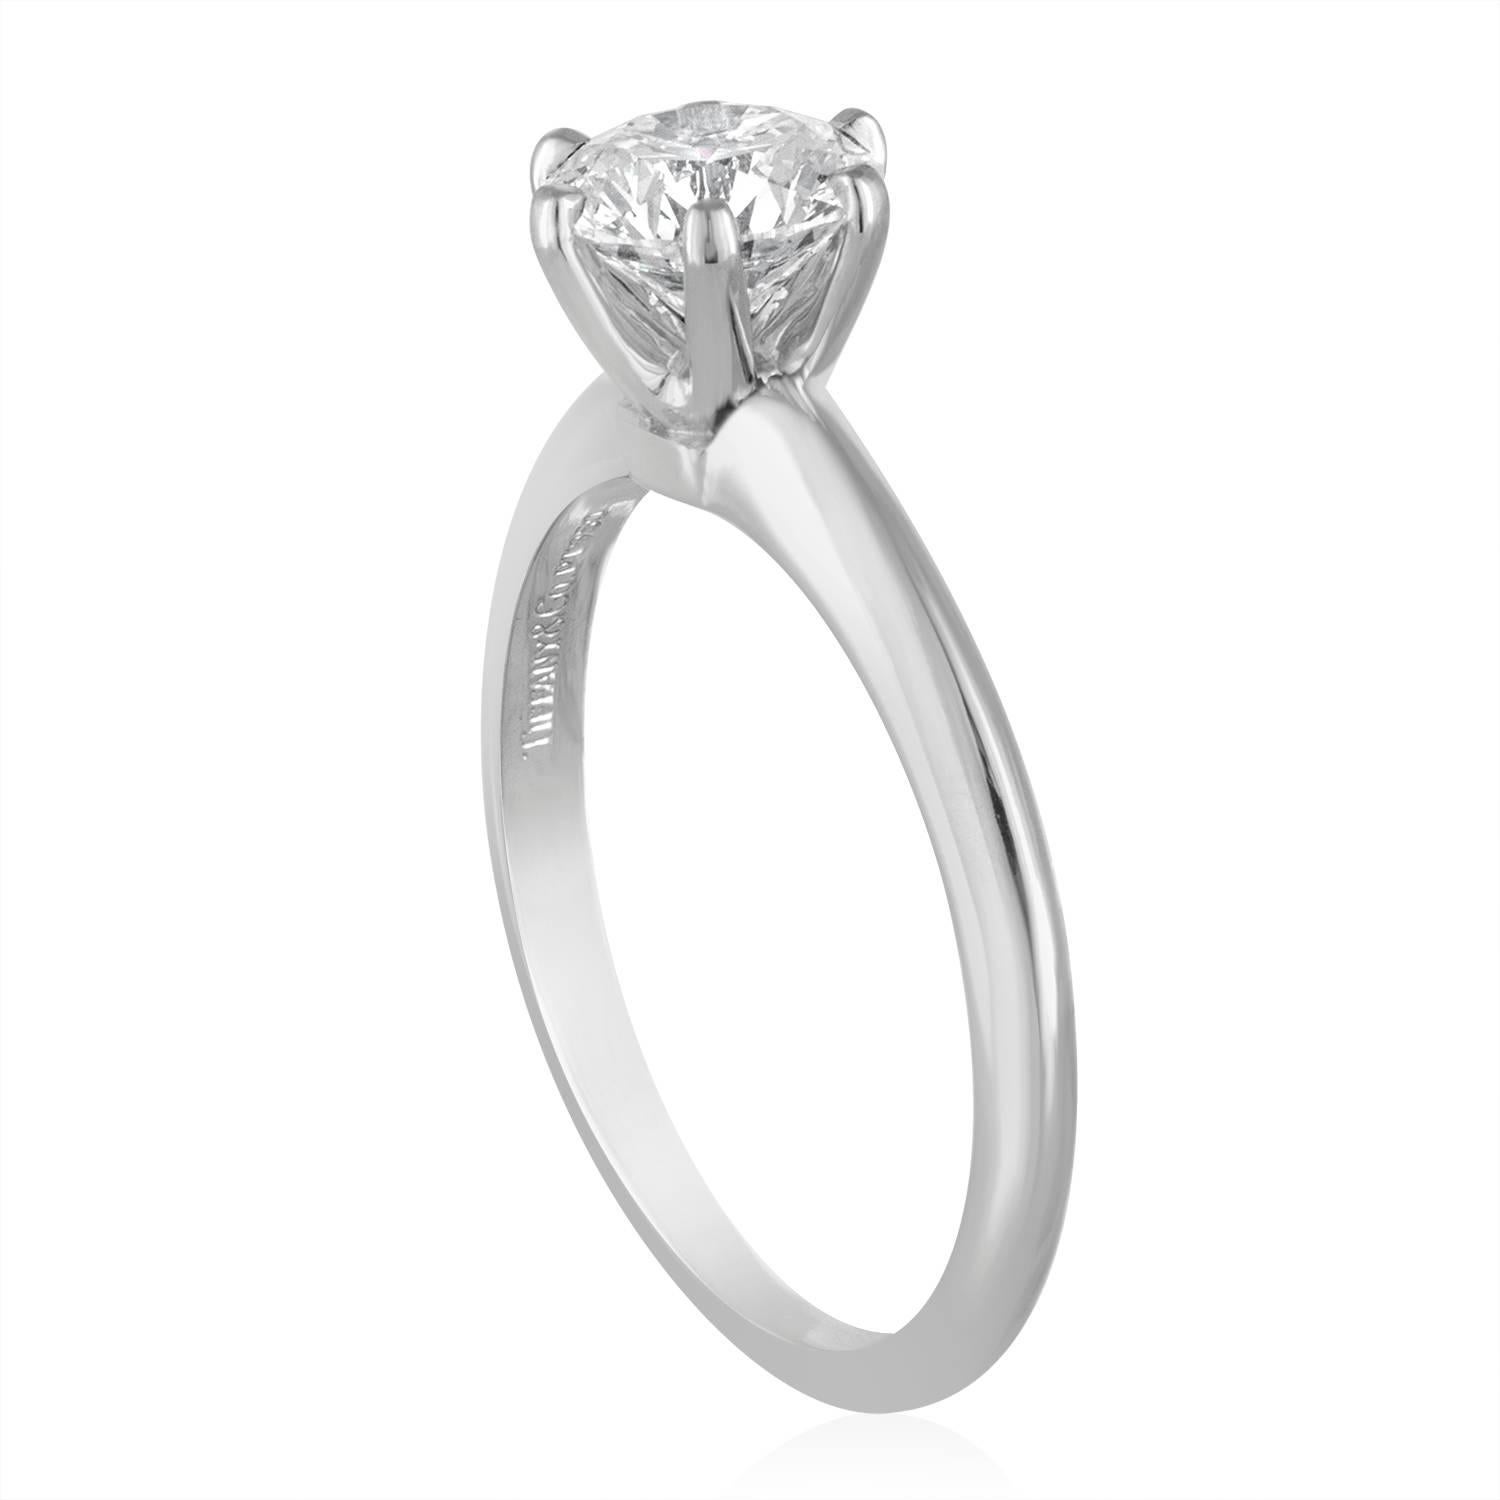 Tiffany & Co. Solitaire Engagement Ring.
The stone is GIA certified 1.19Ct F VS1 XXX.
Tiffany & Co. serial Number etched on the crown.
The stone is set in PLT/950.
The ring comes with a GIA certificate.
The ring is a size 7.5, sizable.
The ring